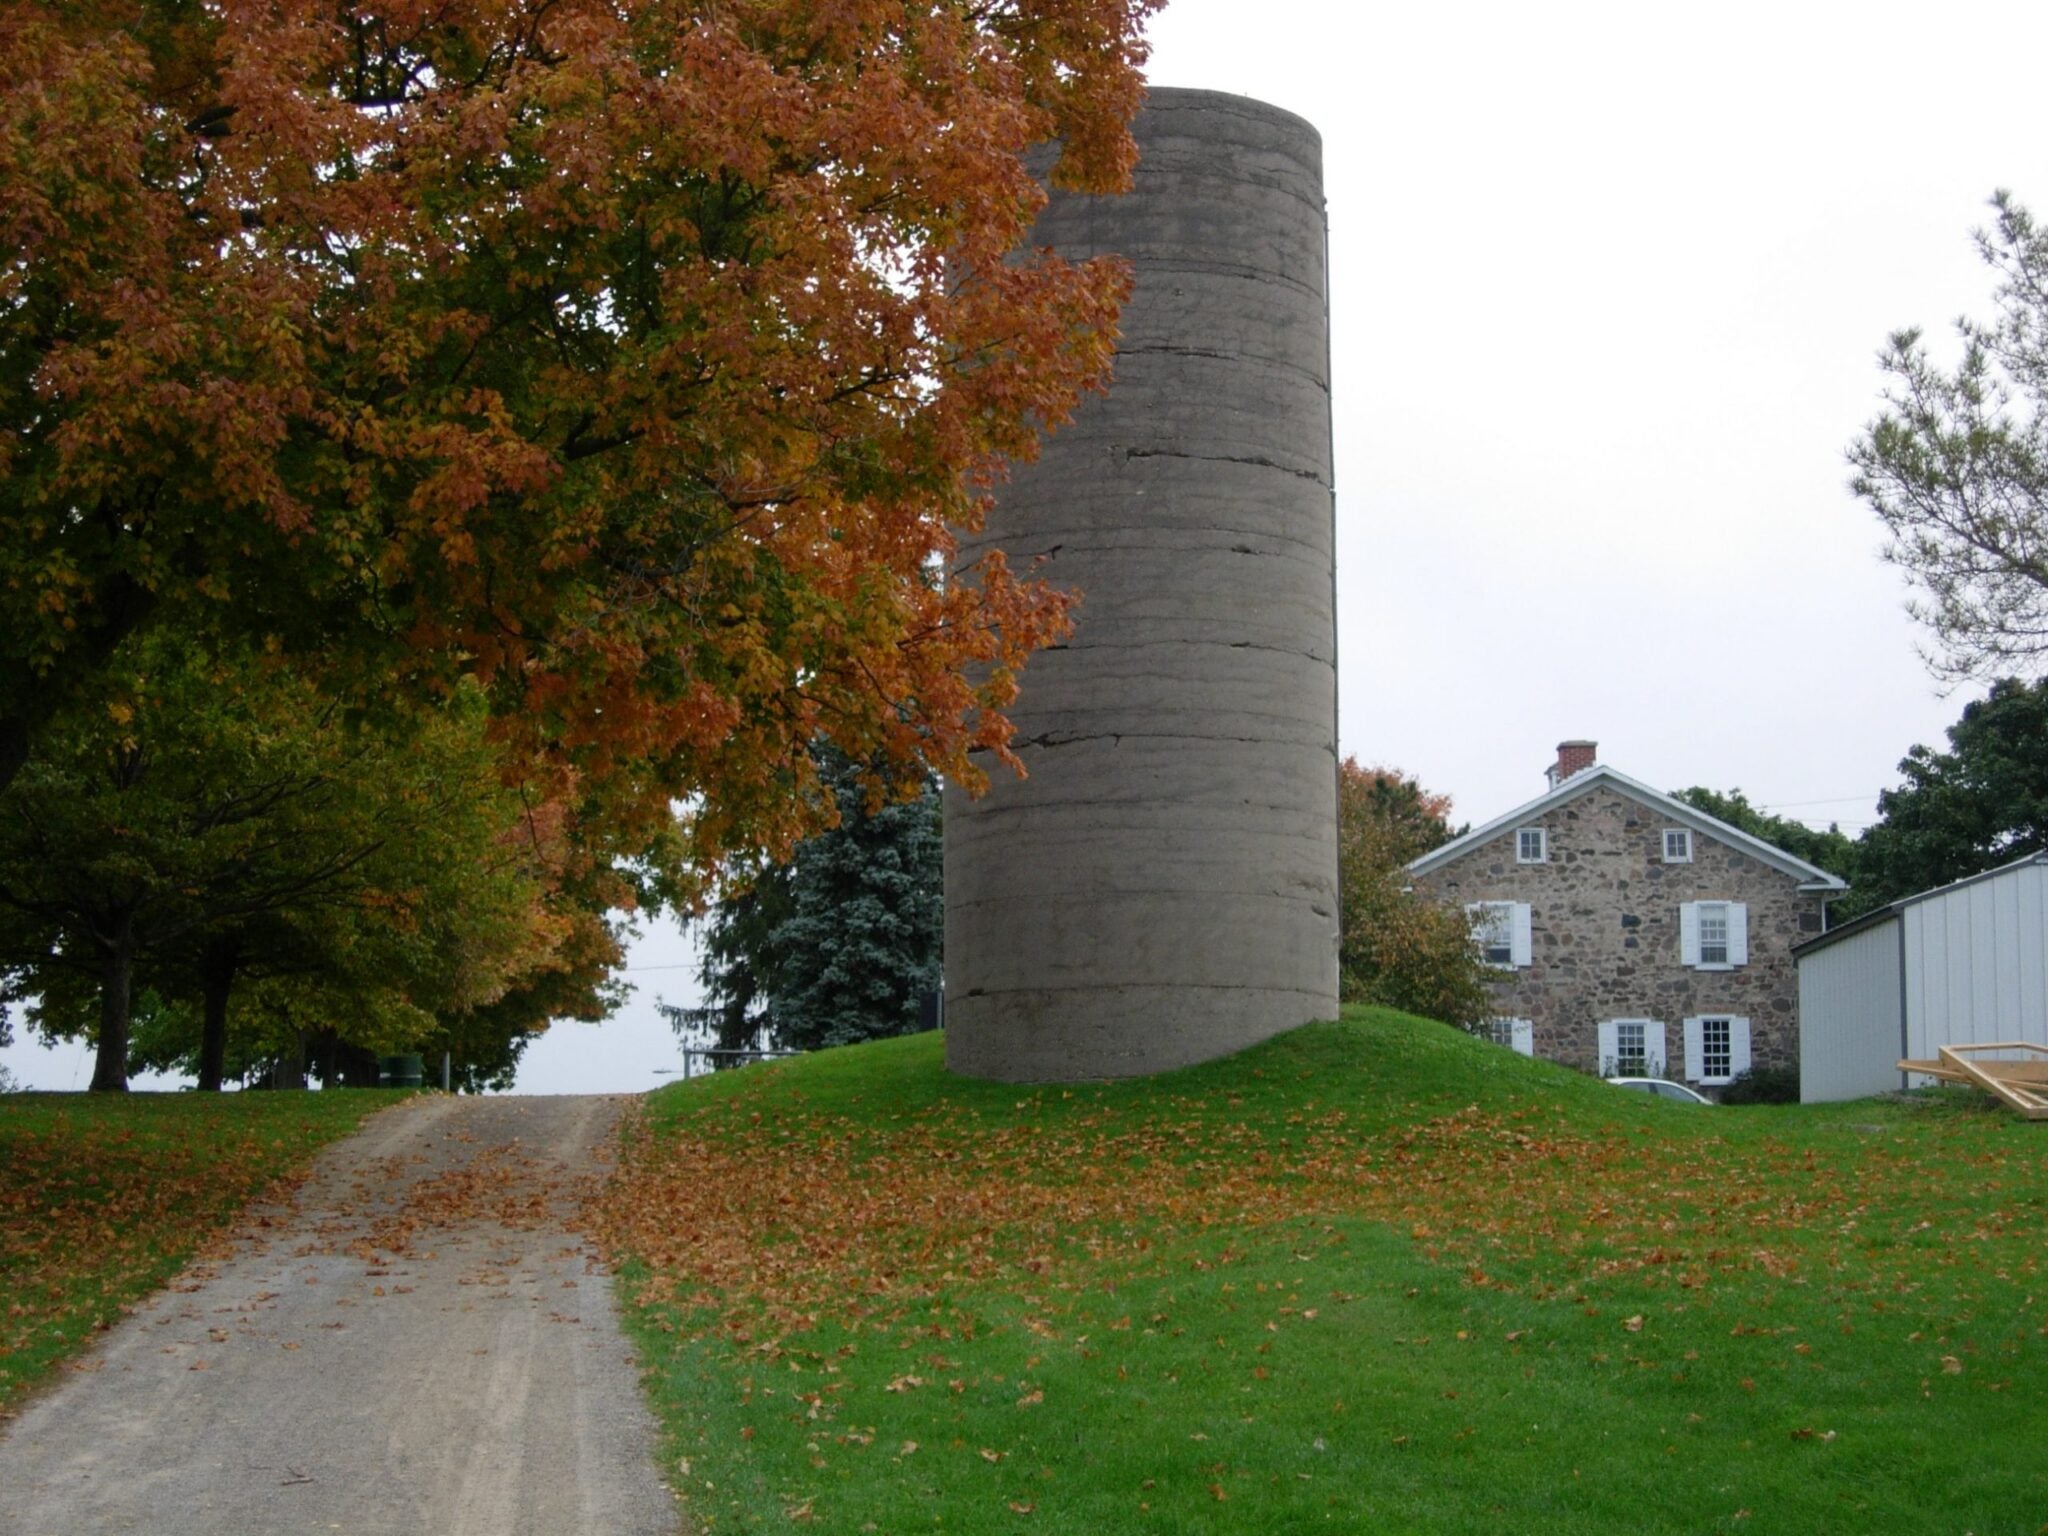 A view of a stone silo, and an tree with orange leaves in fall.